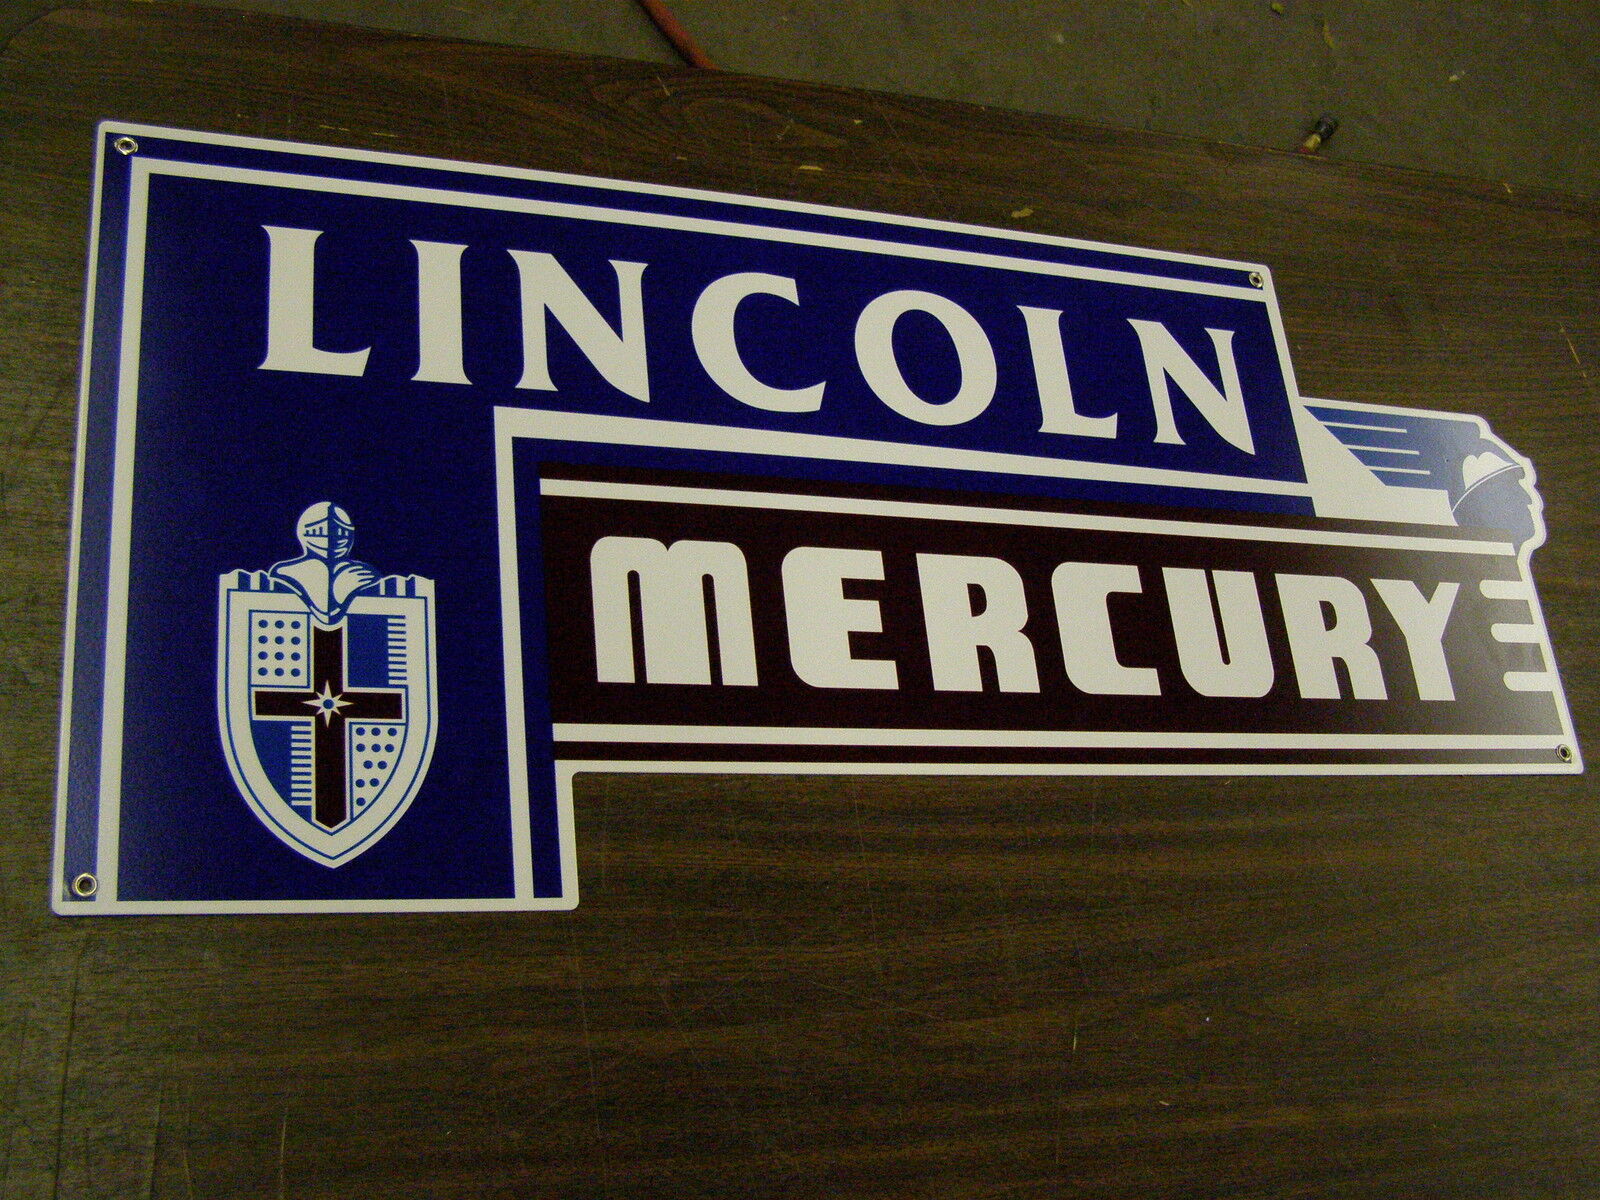 New Repro. Heavy Metal Lincoln Mercury Dealership Sign Nice Quality